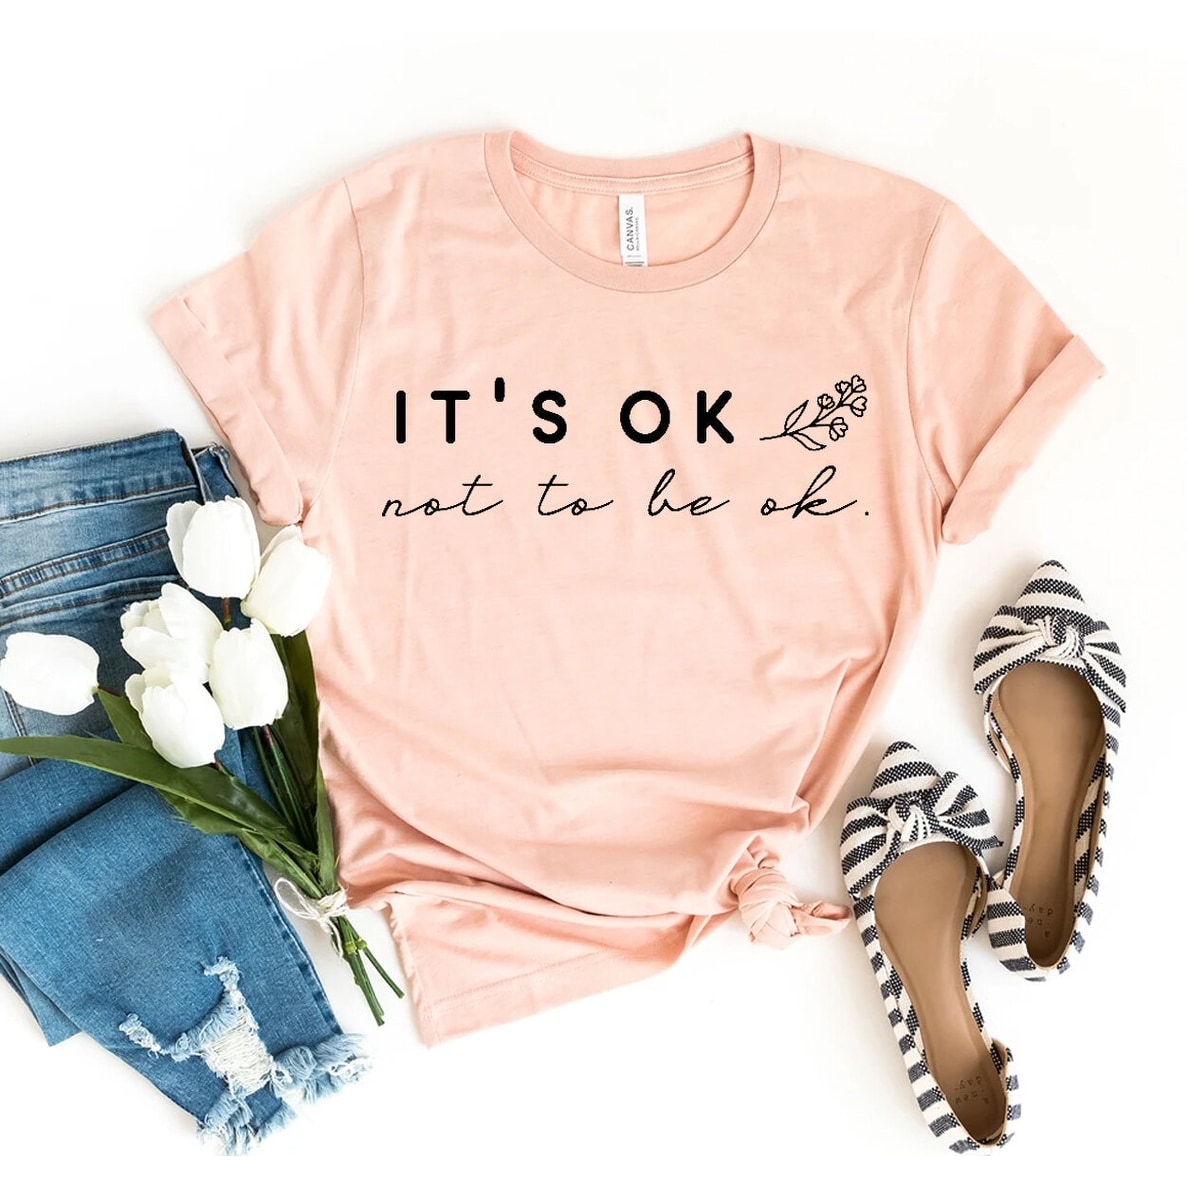 Its Ok Not To Be Ok T-Shirt, Support Shirts, Motivational Top, Depression Tshirt, Gift For Friend, Mental Health Shirt,